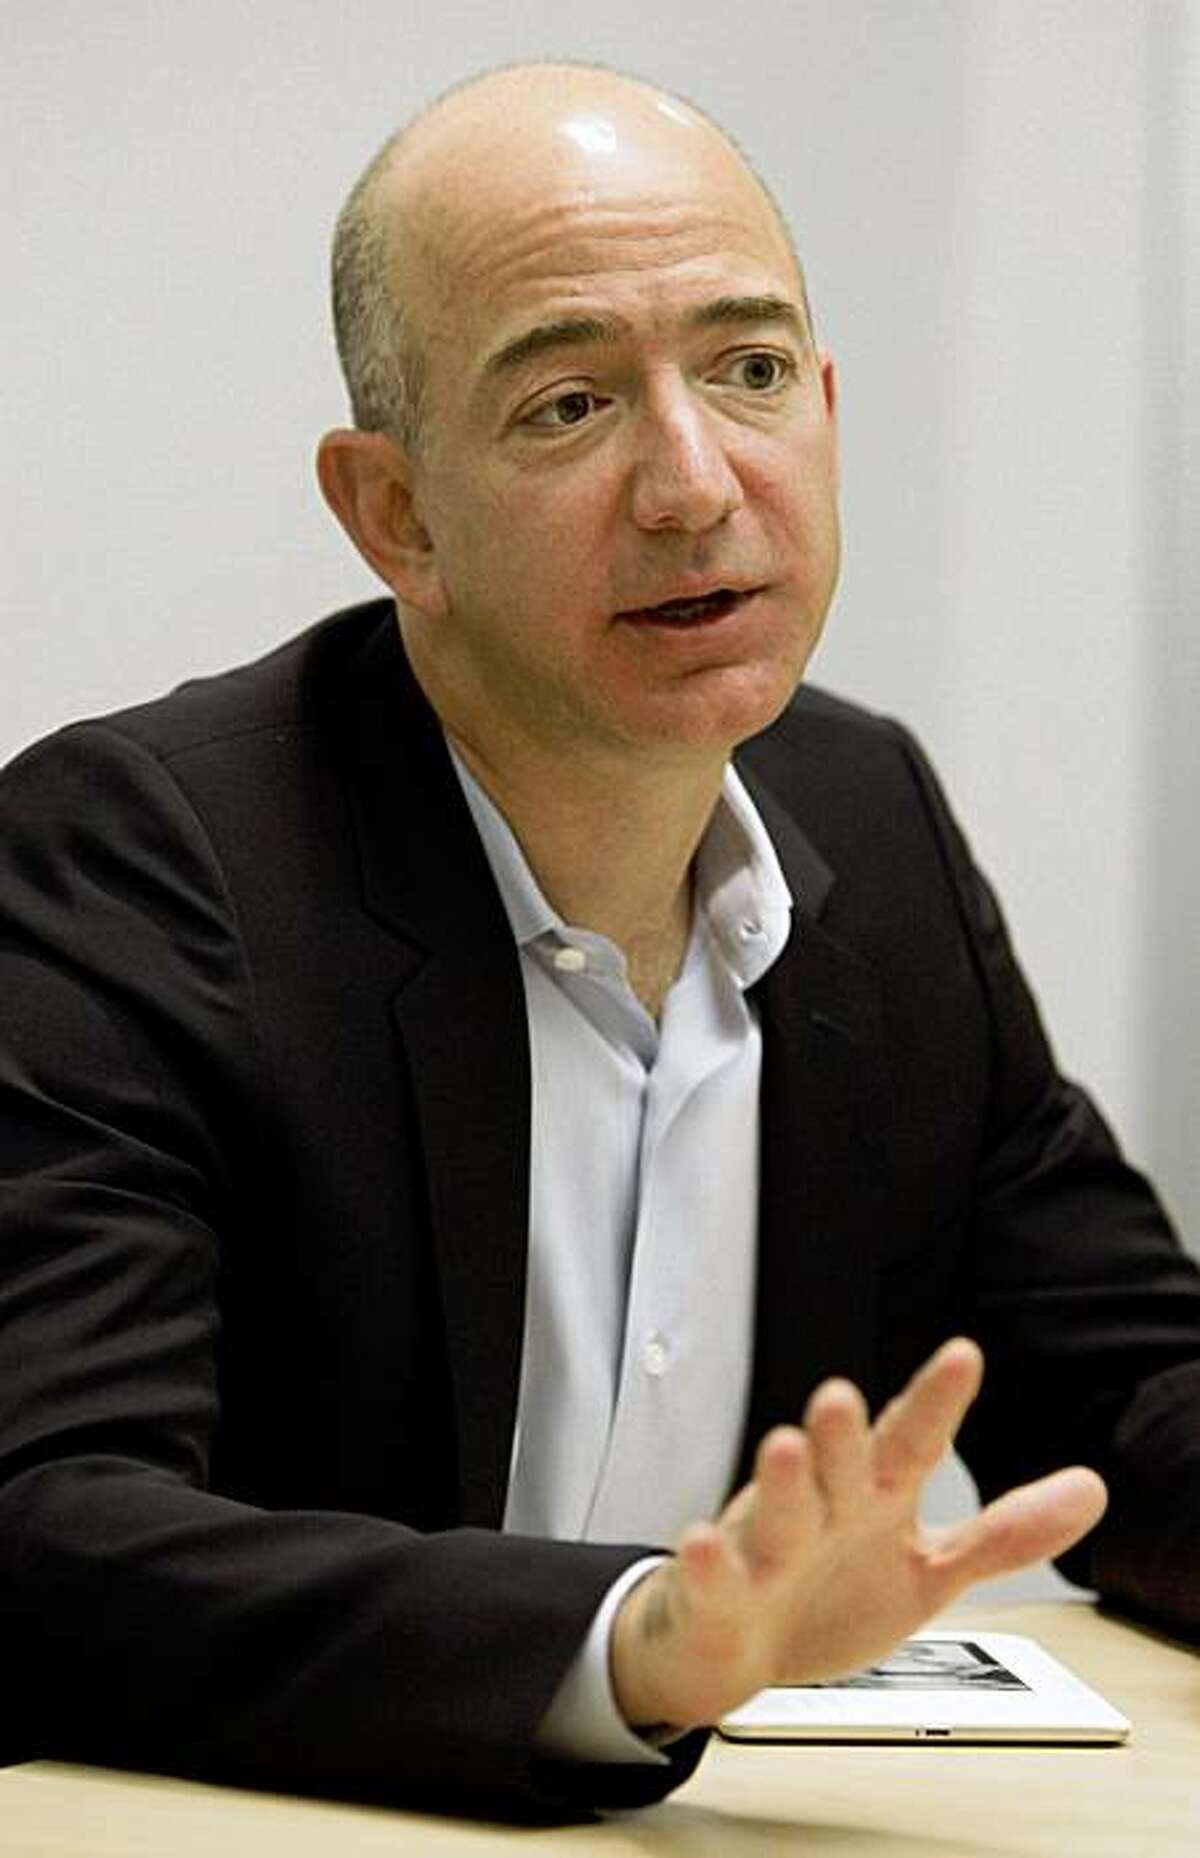 Amazon CEO Jeff Bezos gestures during an interview Tuesday, Oct. 6, 2009, in Cupertino, Calif. Amazon.com Inc. is cutting the price of its Kindle electronic-book reader yet again and launching an international version, in hopes of spurring more sales and keeping it ahead of a growing field of competitors. (AP Photo/Ben Margot)